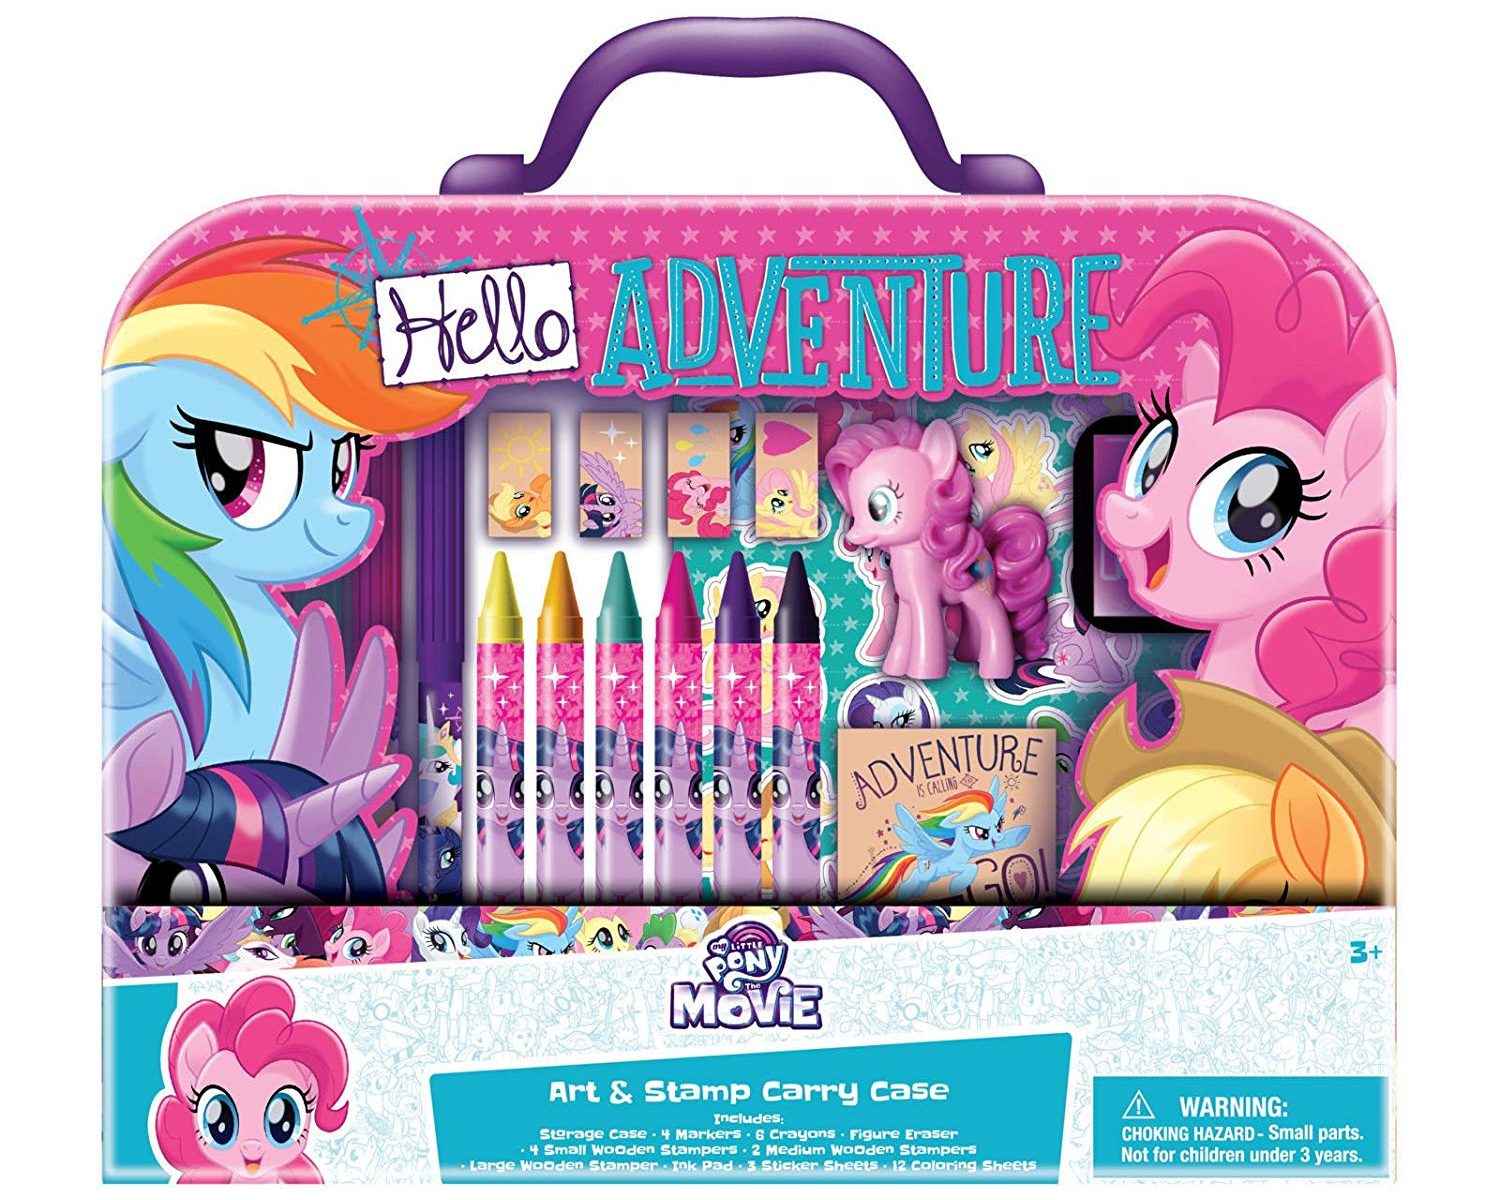 my little pony carrying case